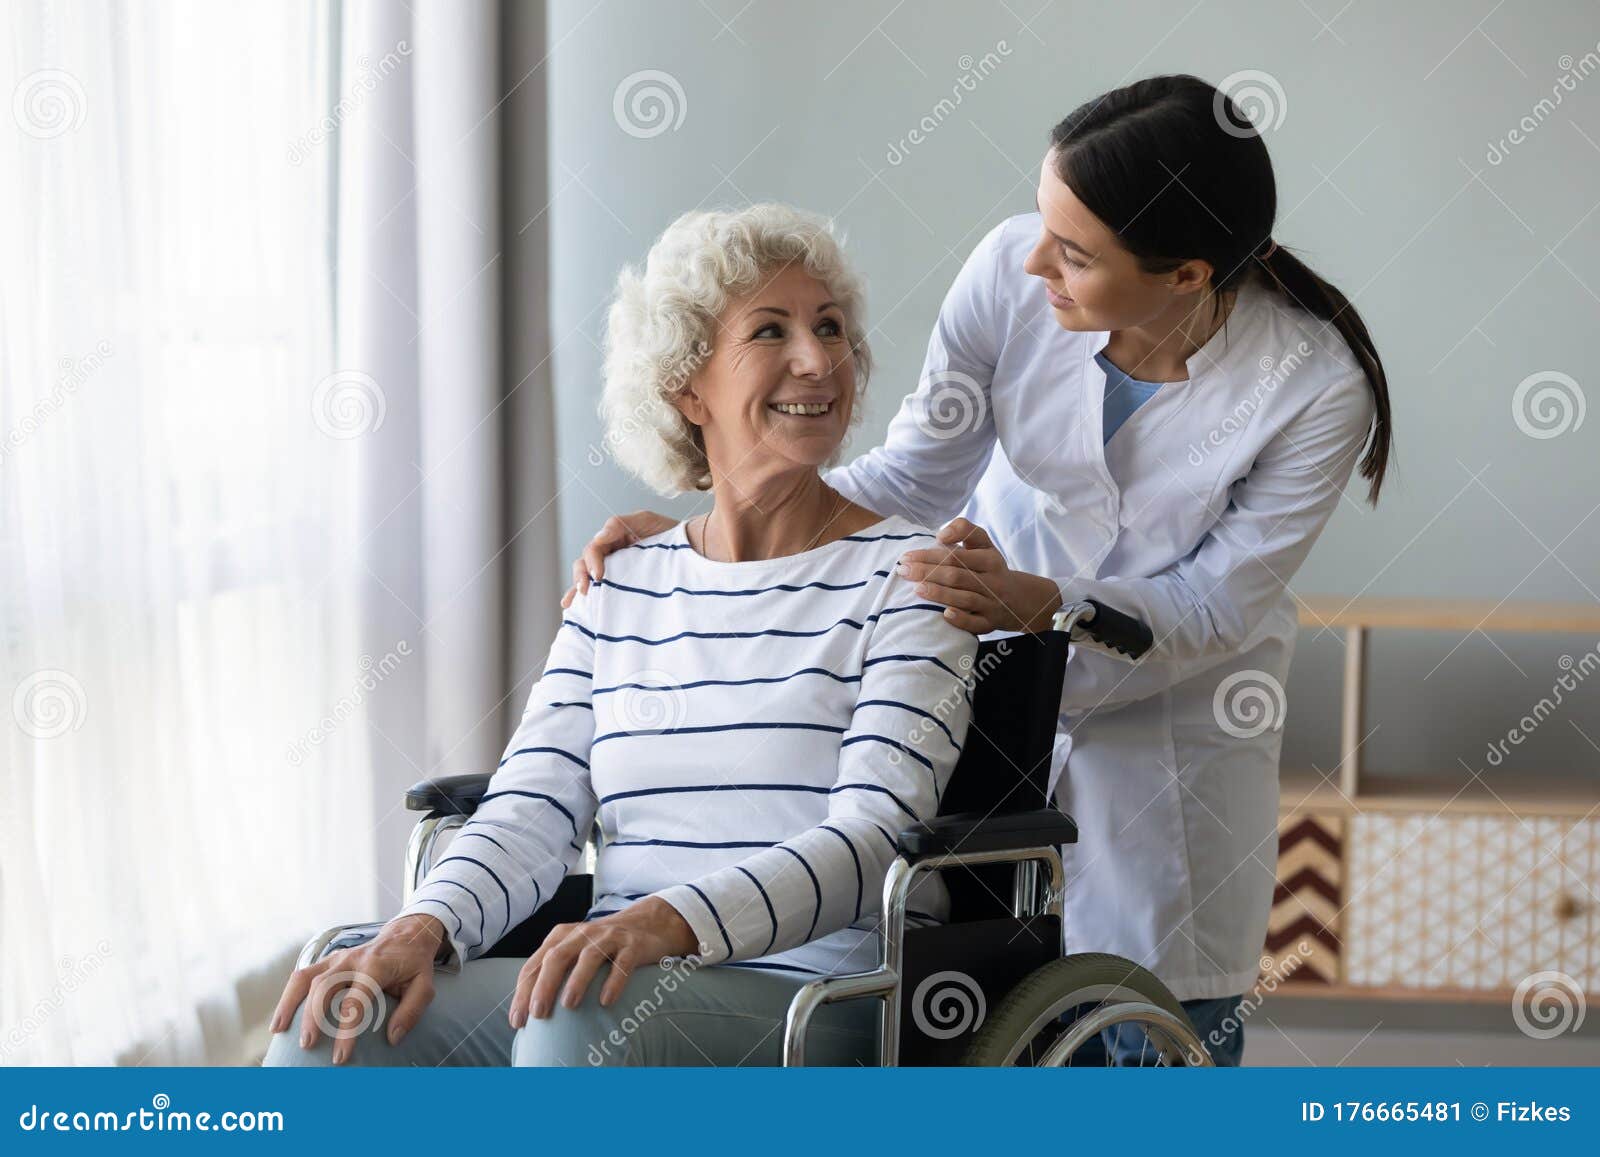 female doctor take care of disabled senior lady